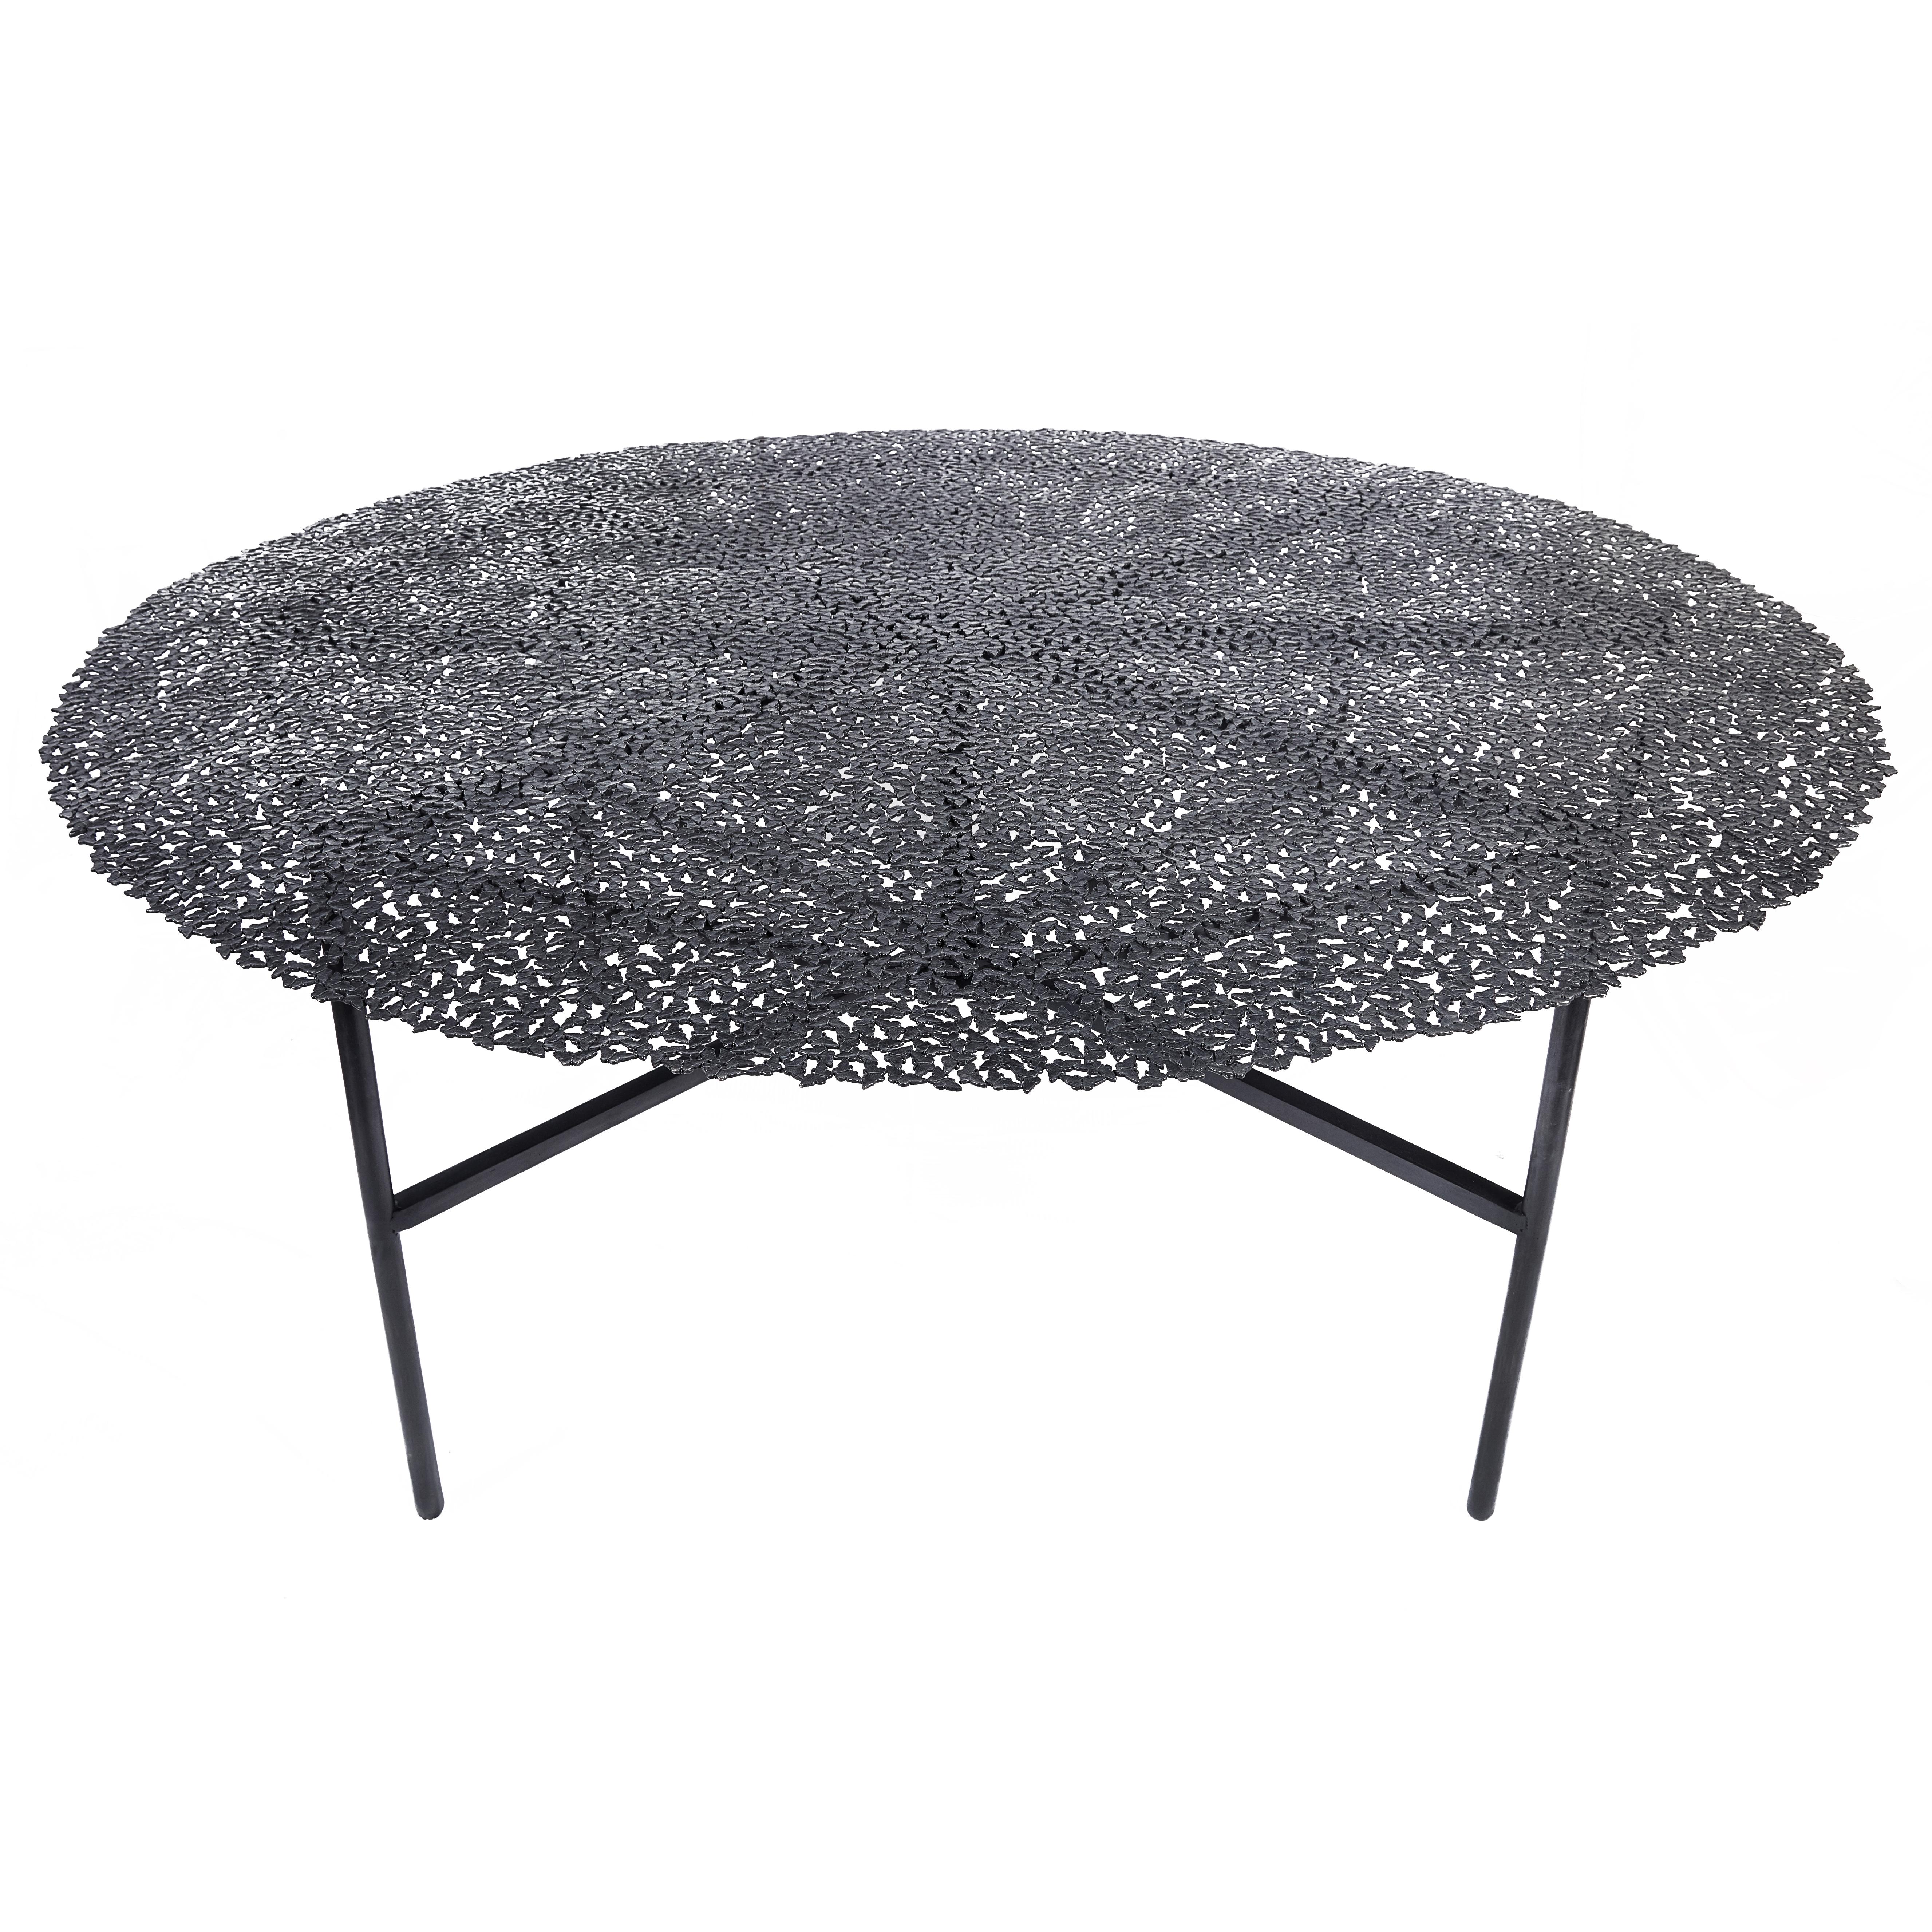 Jean Black Patina Bronze Dining Table by Fred and Juul
Dimensions: Ø 180 x H 74 cm.
Materials: Black patinated bronze.

Custom sizes, materials or finishes are available on request. Please contact us.

A swarm of butterflies as delicate as a lace